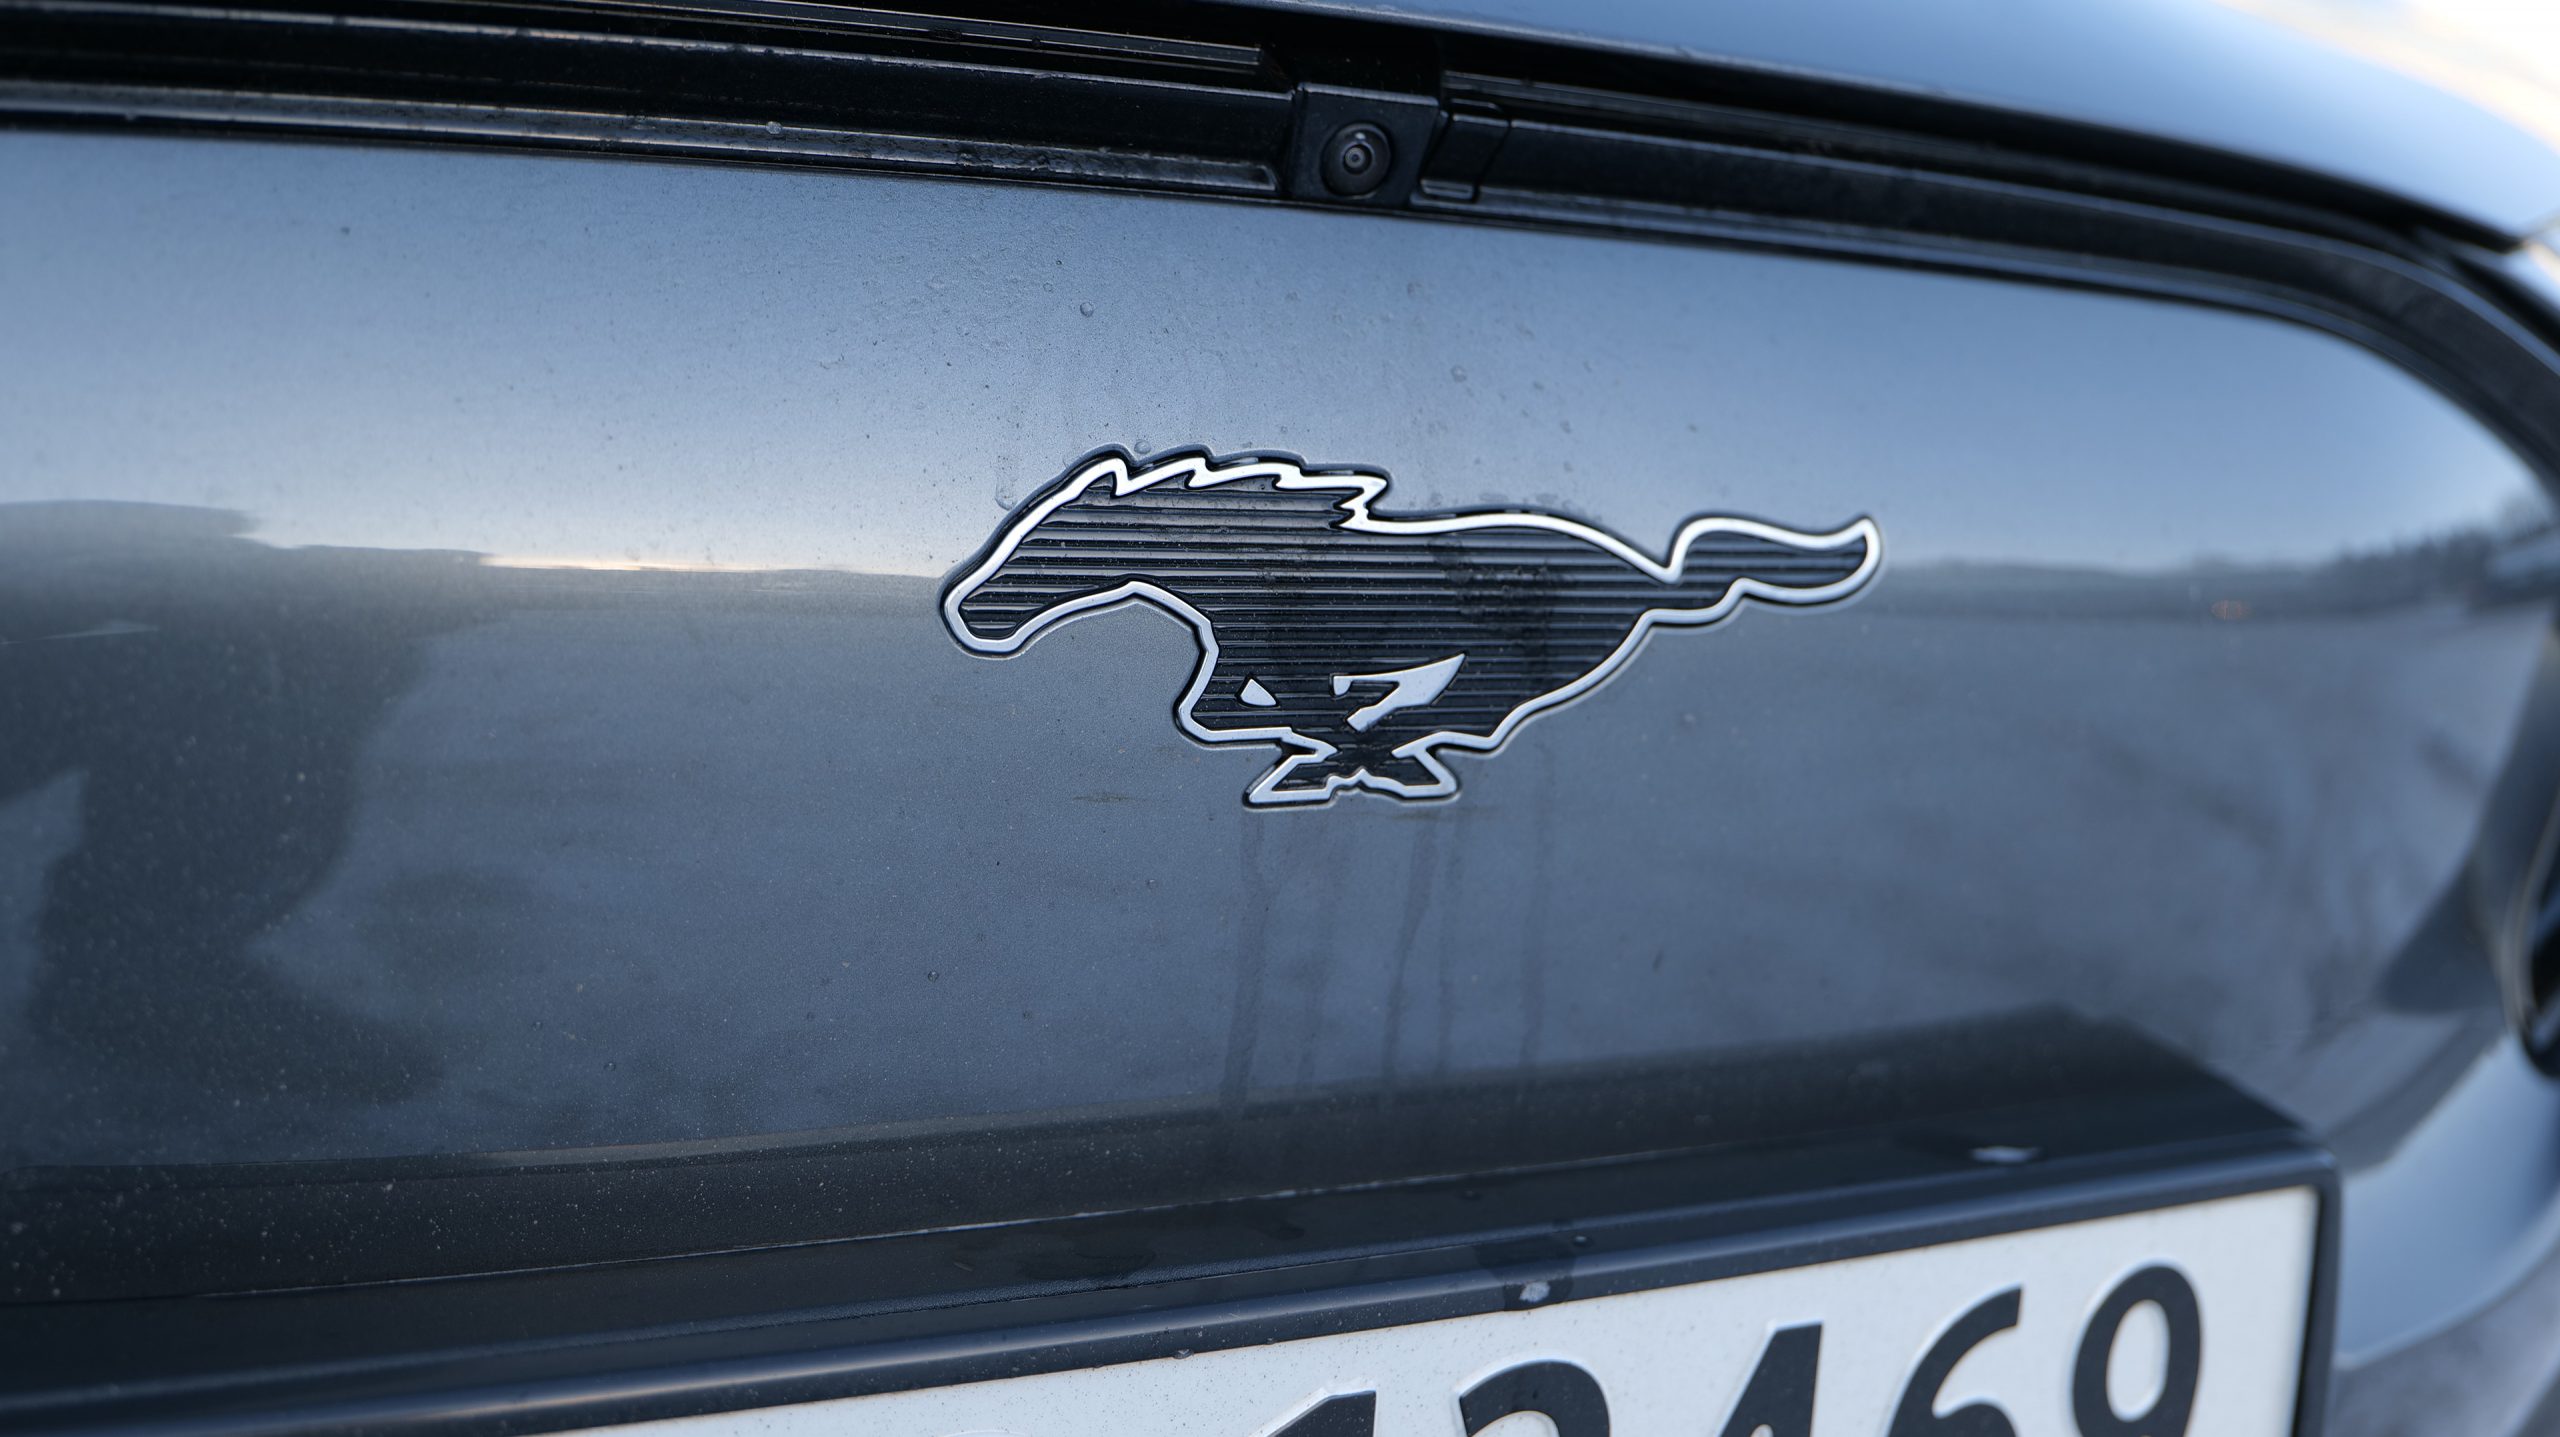 Ford Mustang Mach-E logo front